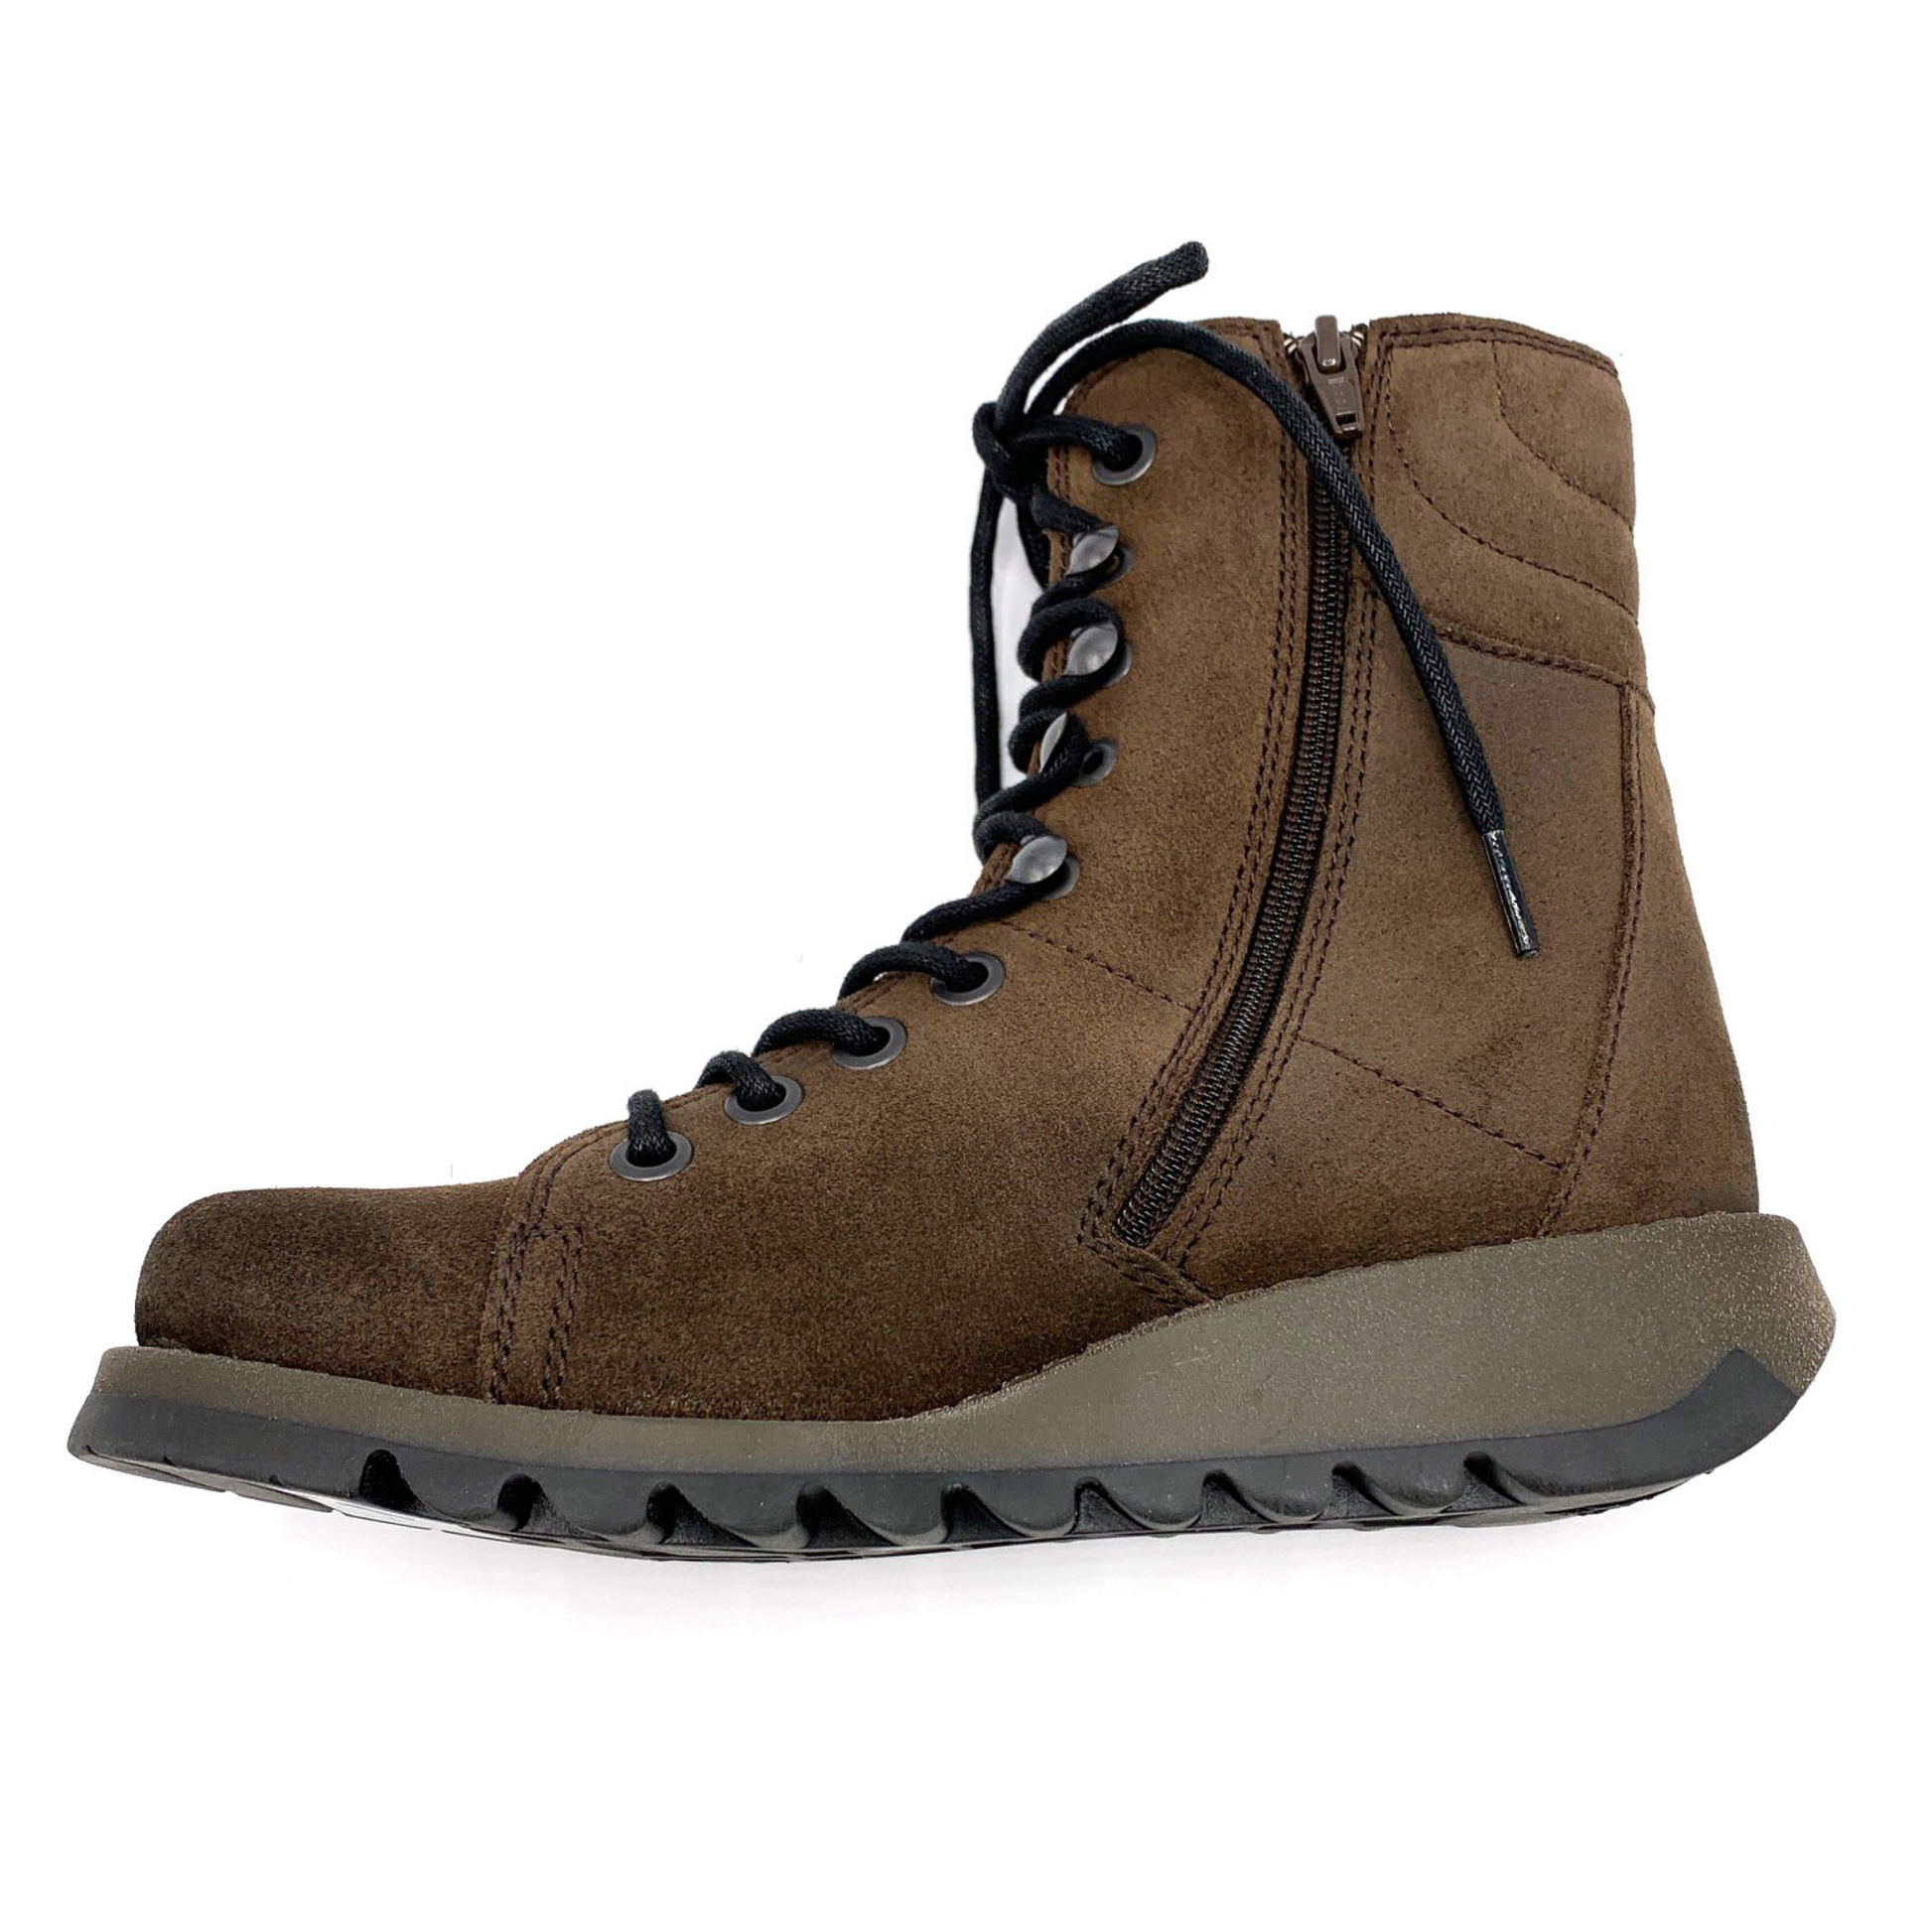 A left side view of a brown suede boot with dark stitching, dark laces, and a darker rubber sole.